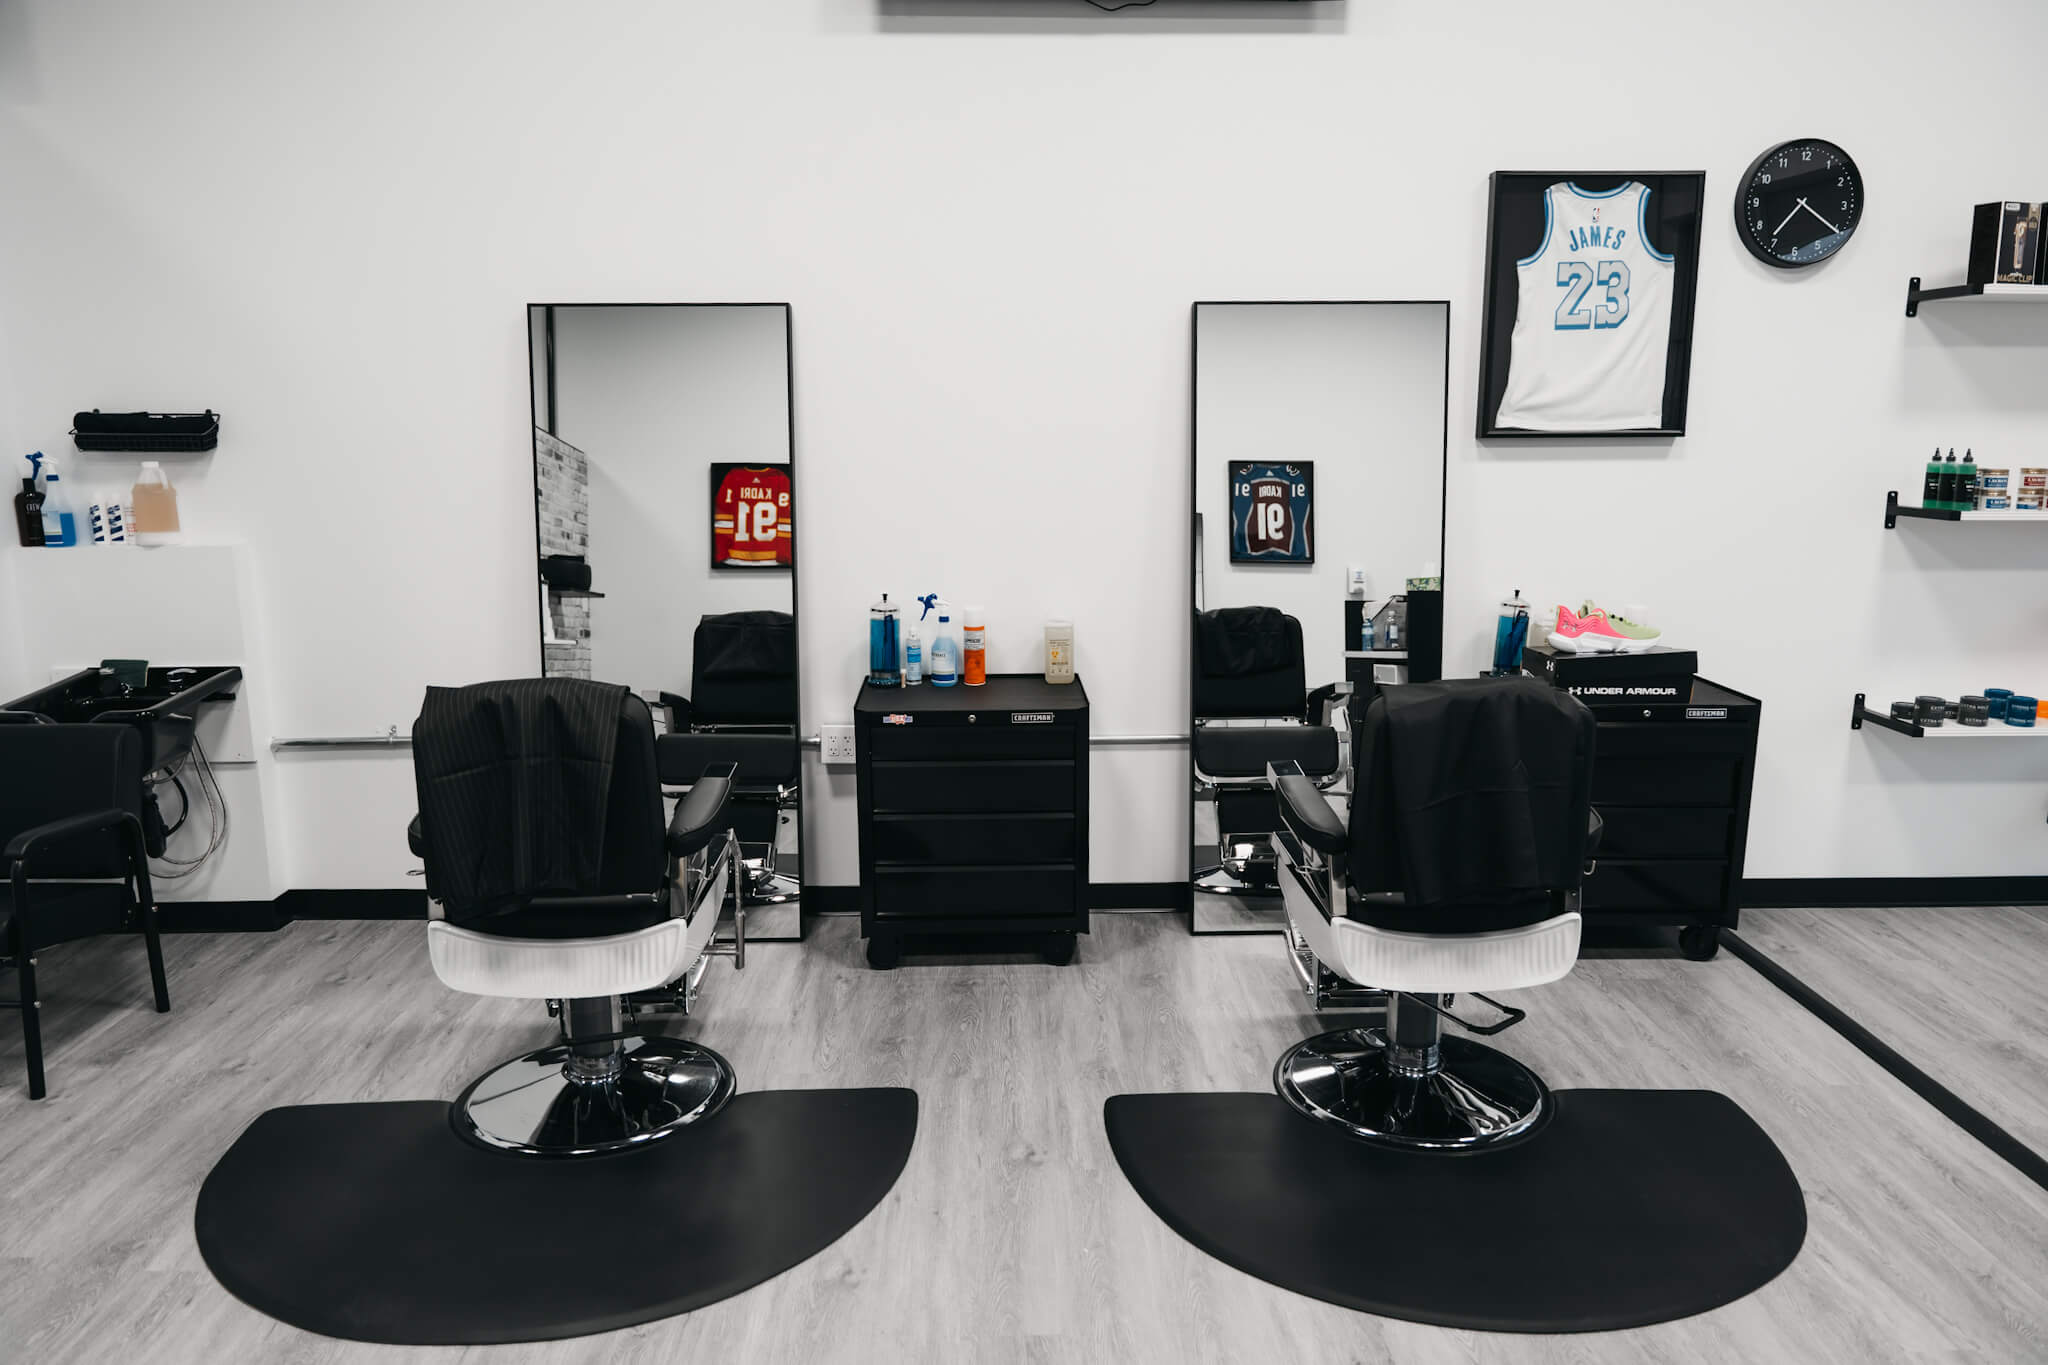 Macleod Trail Barbers Barbershop and Chairs styled in black and white with a clean, crisp, and modern aesthetic.